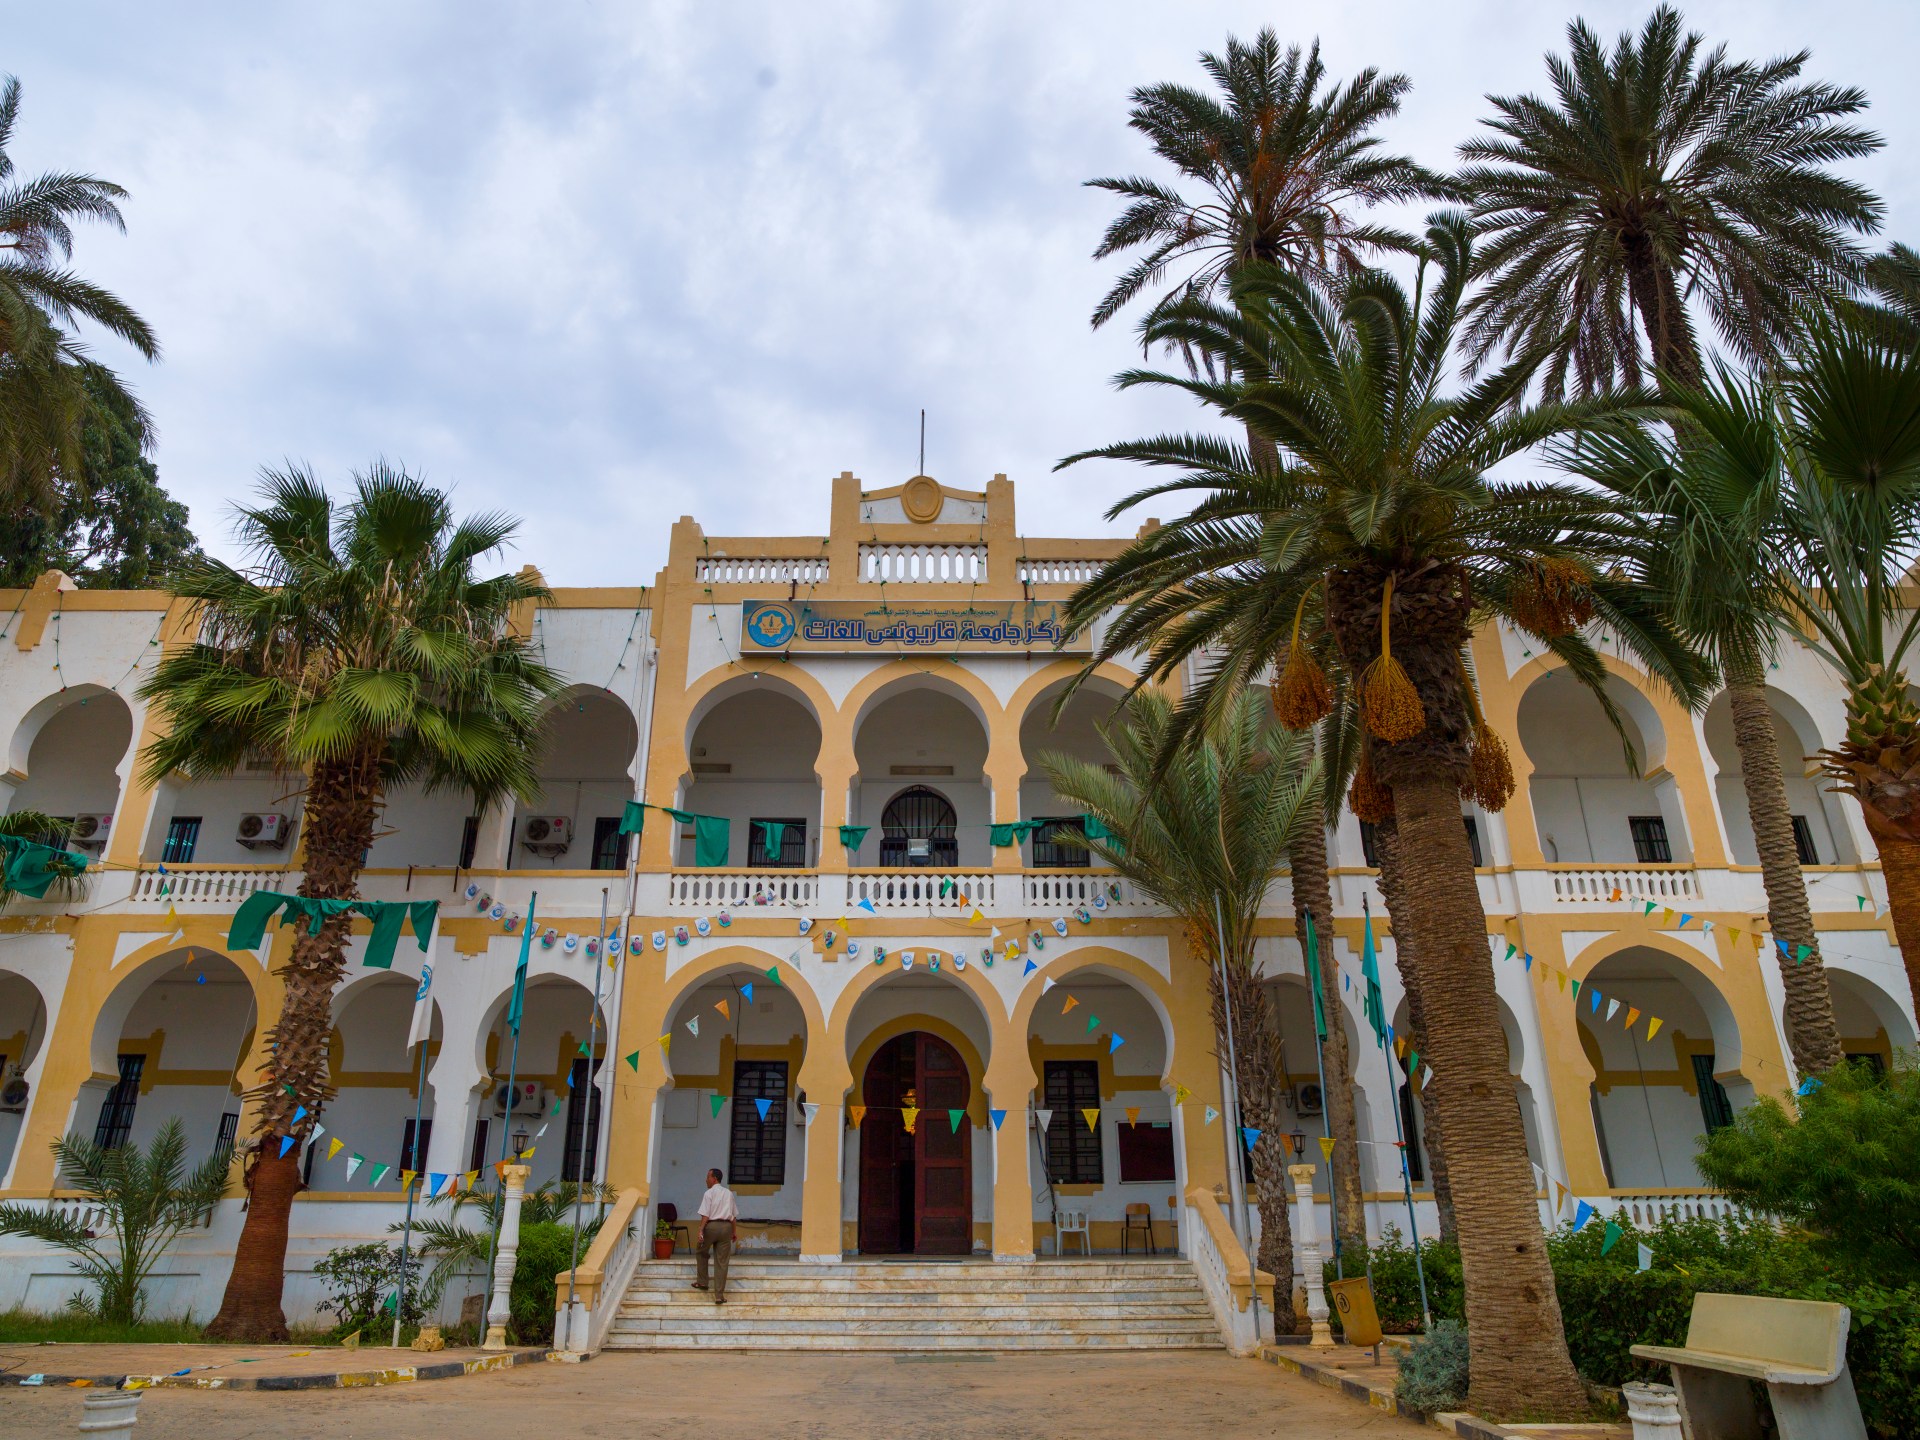 Cultural treasure or painful reminder? Libya’s colonial architecture | Arts and Culture